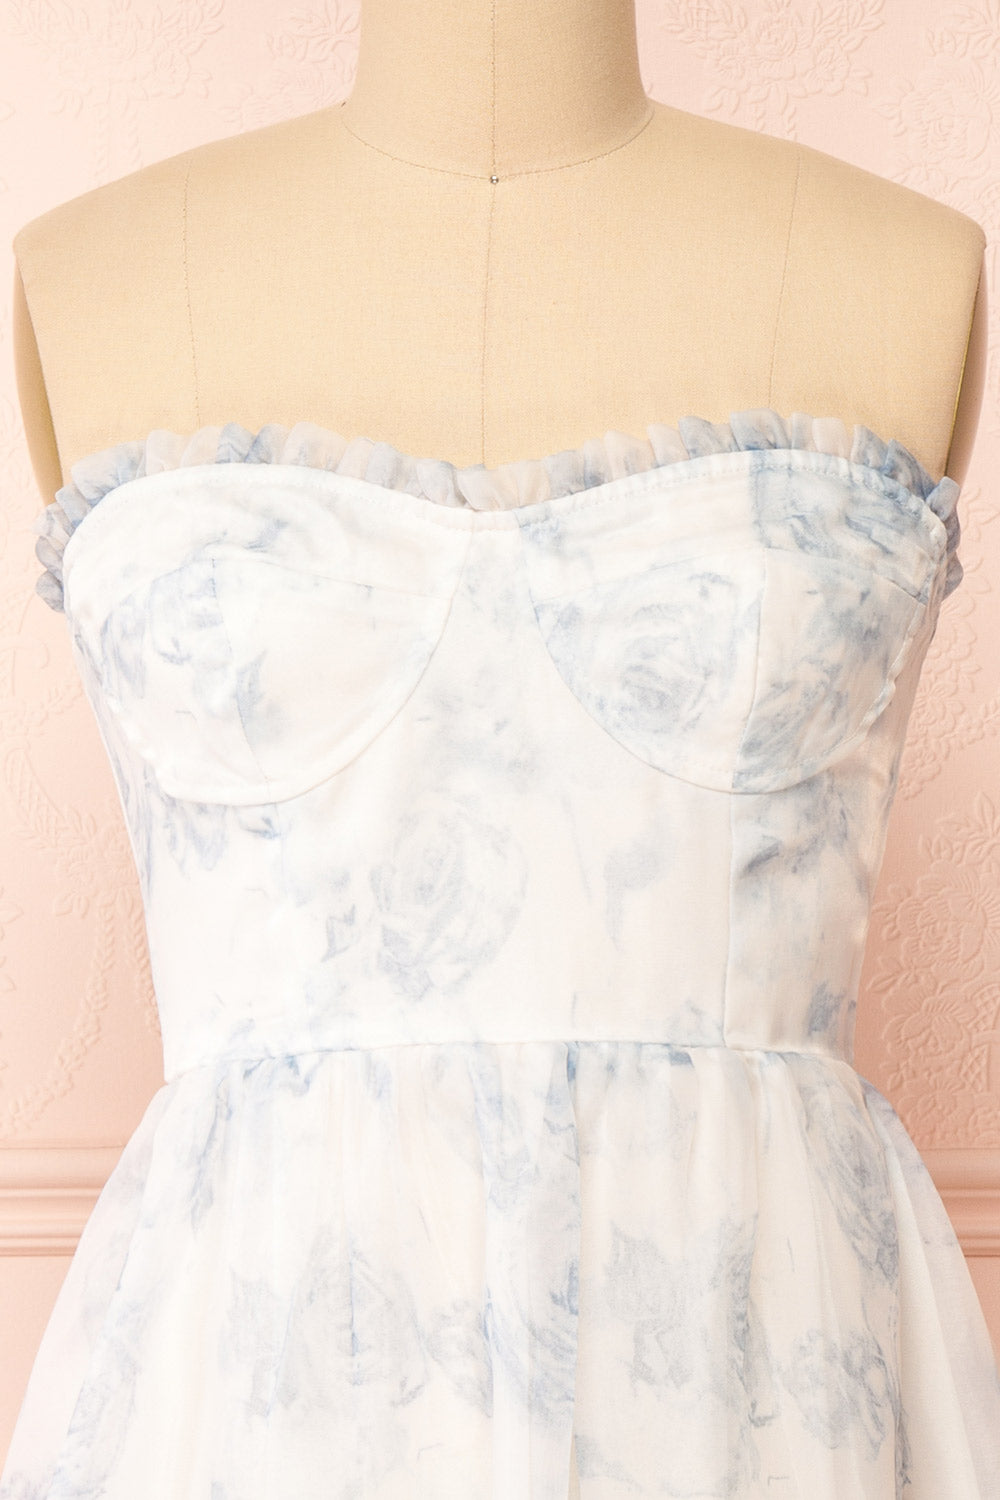 Caelly Blue & White Bustier Floral Midi Dress | Boutique 1861 front close-up